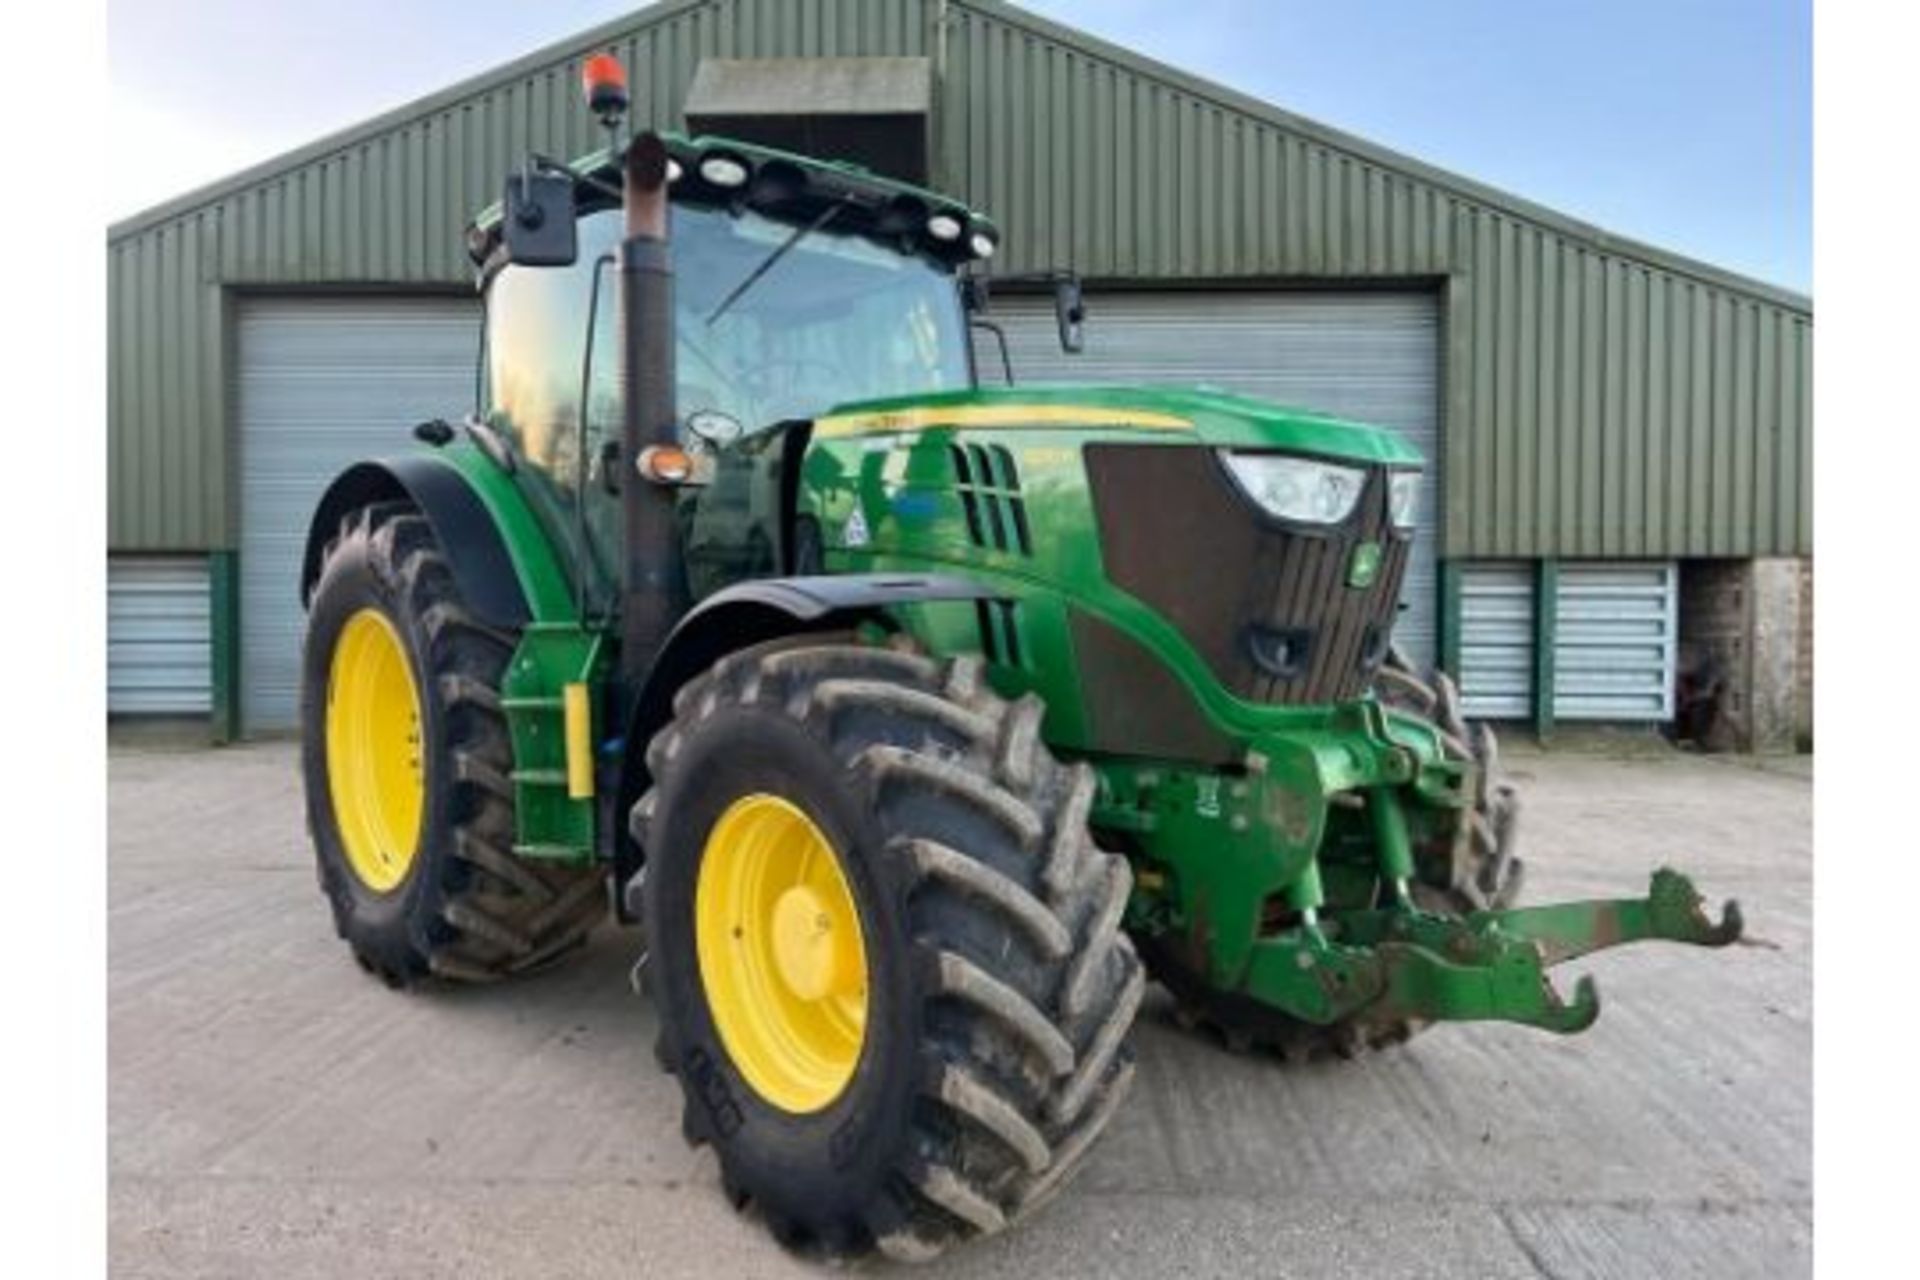 2013 John Deere 6210R 4wd Tractor, approx. 8136 Hours, Reg No. - Image 2 of 9